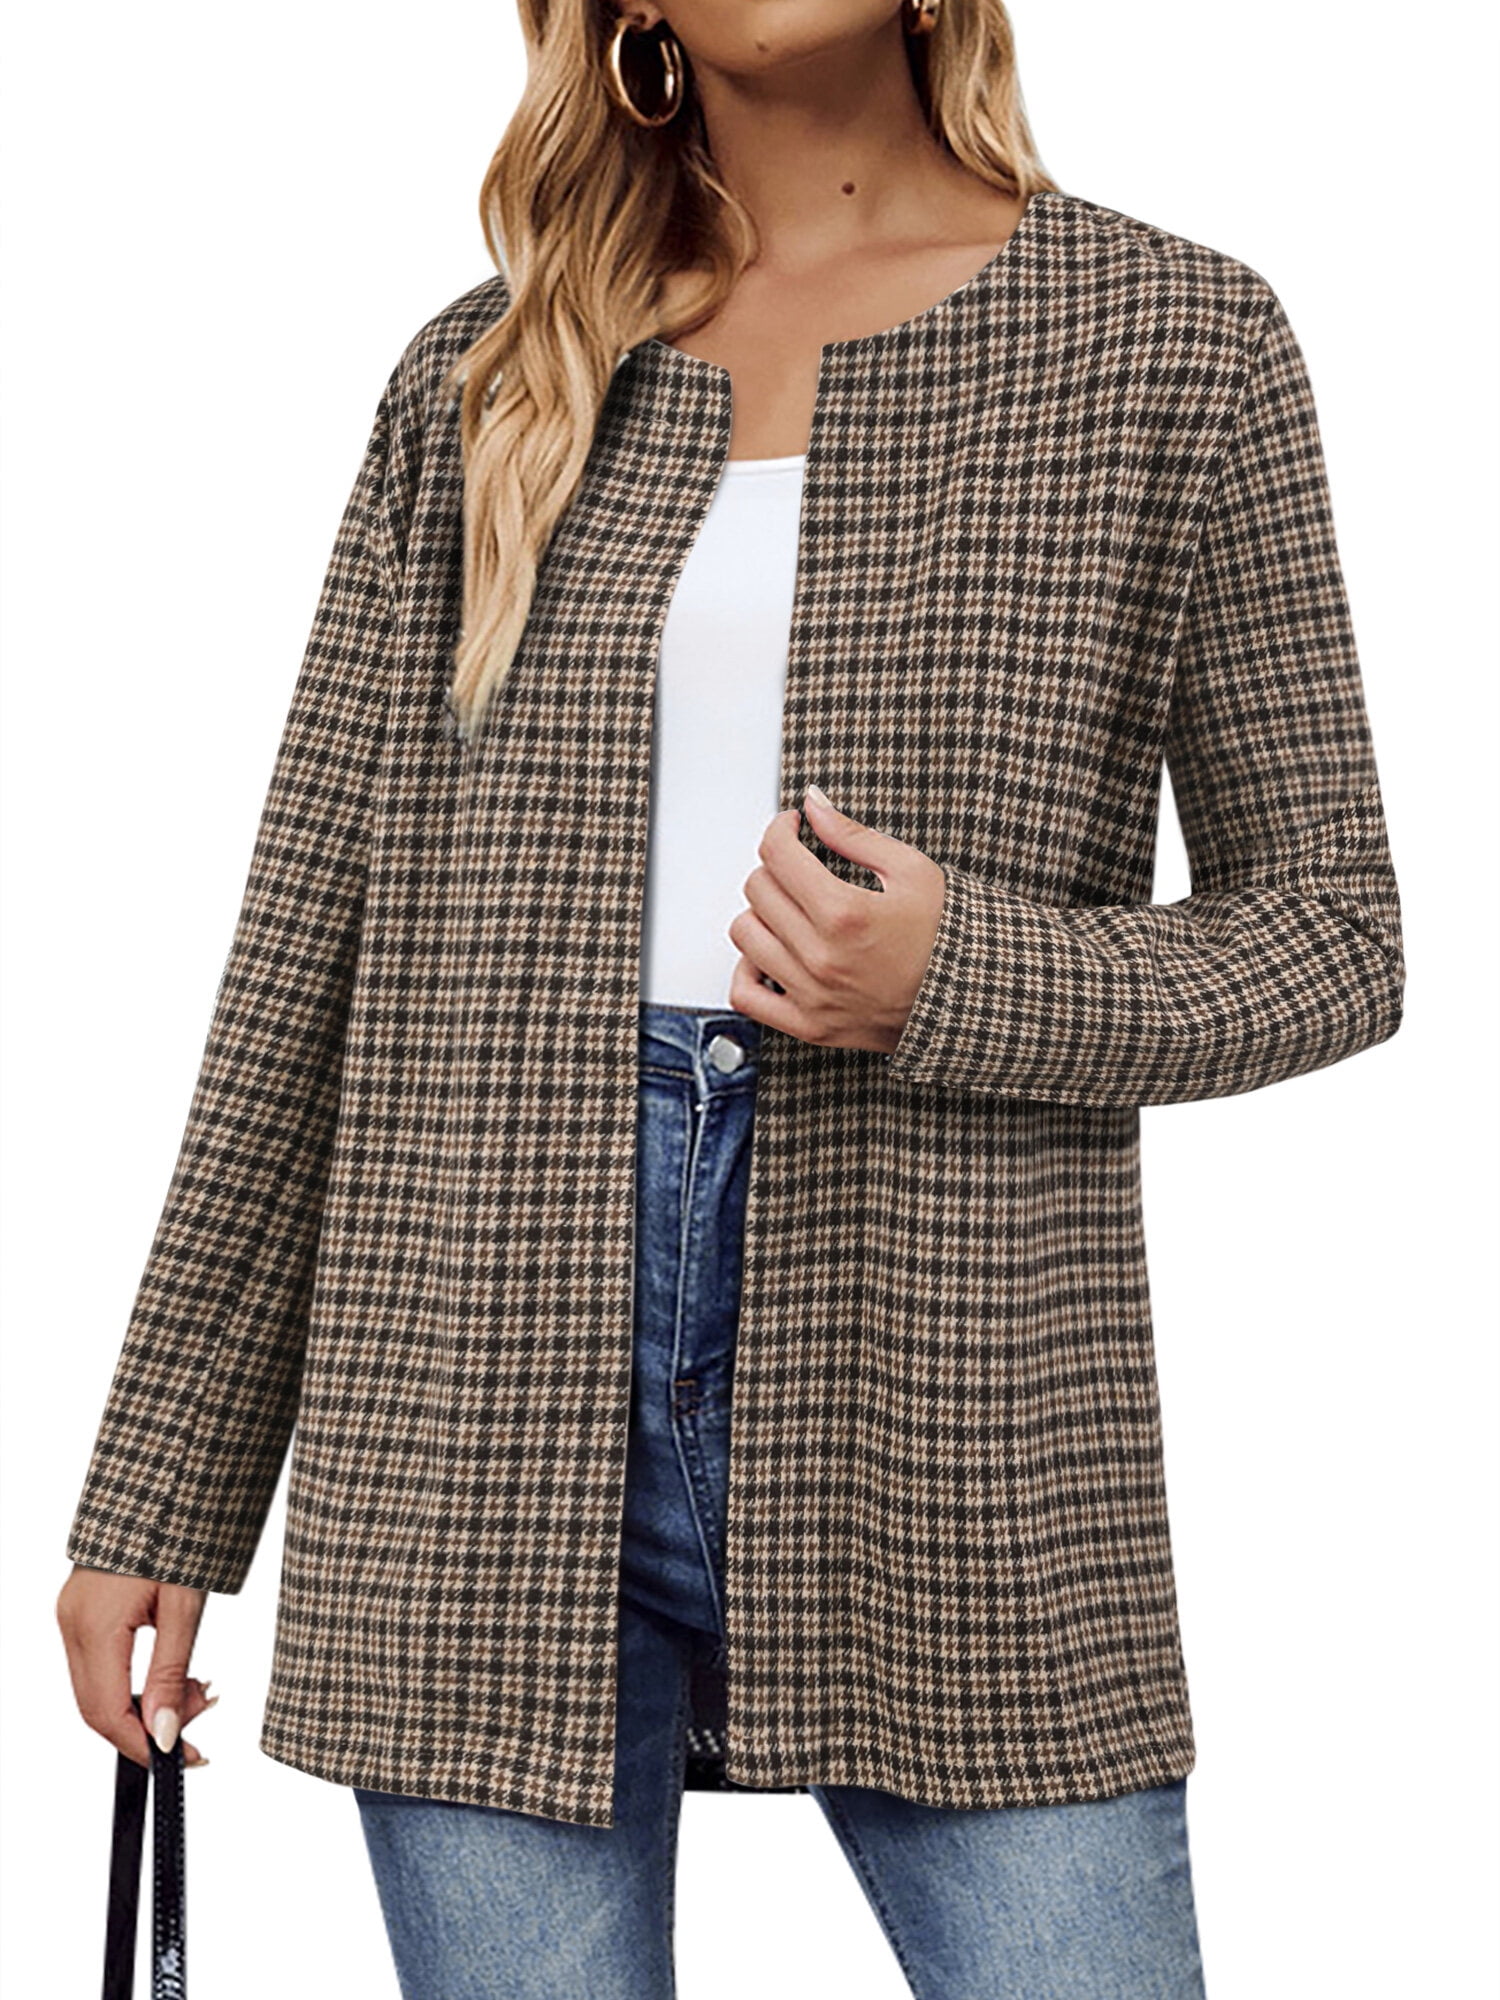 HUBERY Women Open Front Long Sleeve Houndstooth Plaid Print Cardigan ...